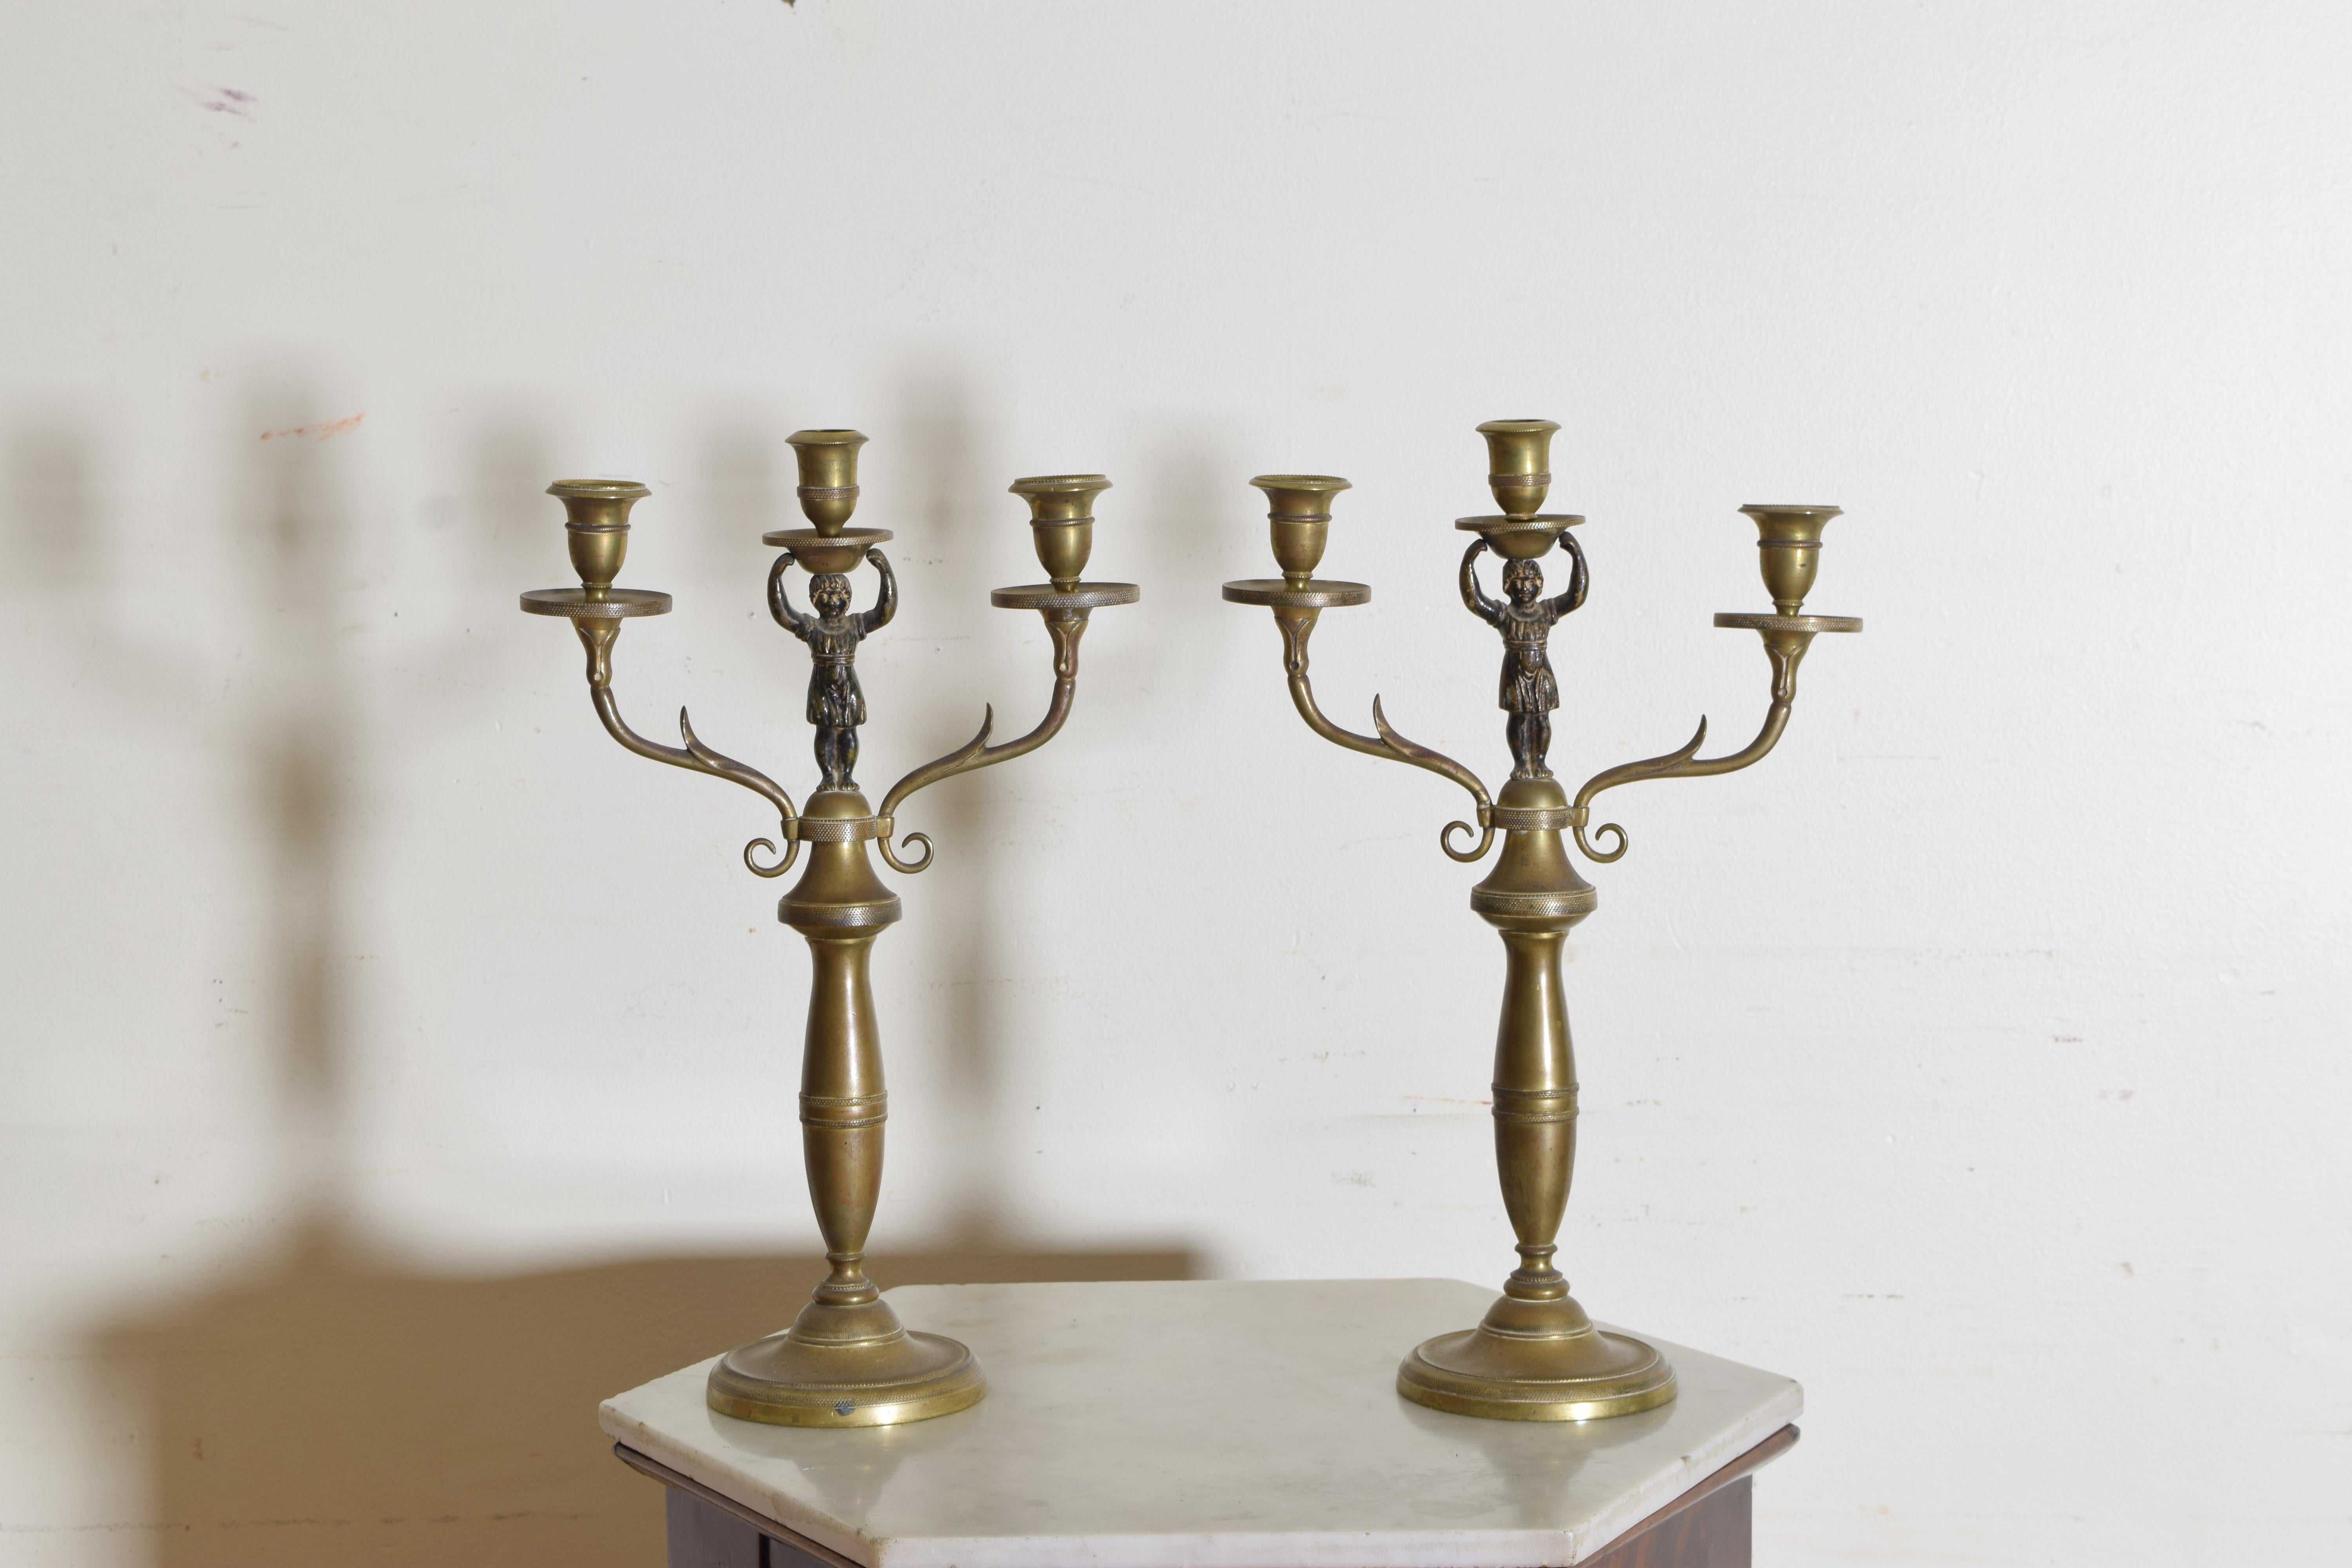 Finely cast and supported by circular bases, the tops issuing two arms with single candleholders with a central figural candleholder.